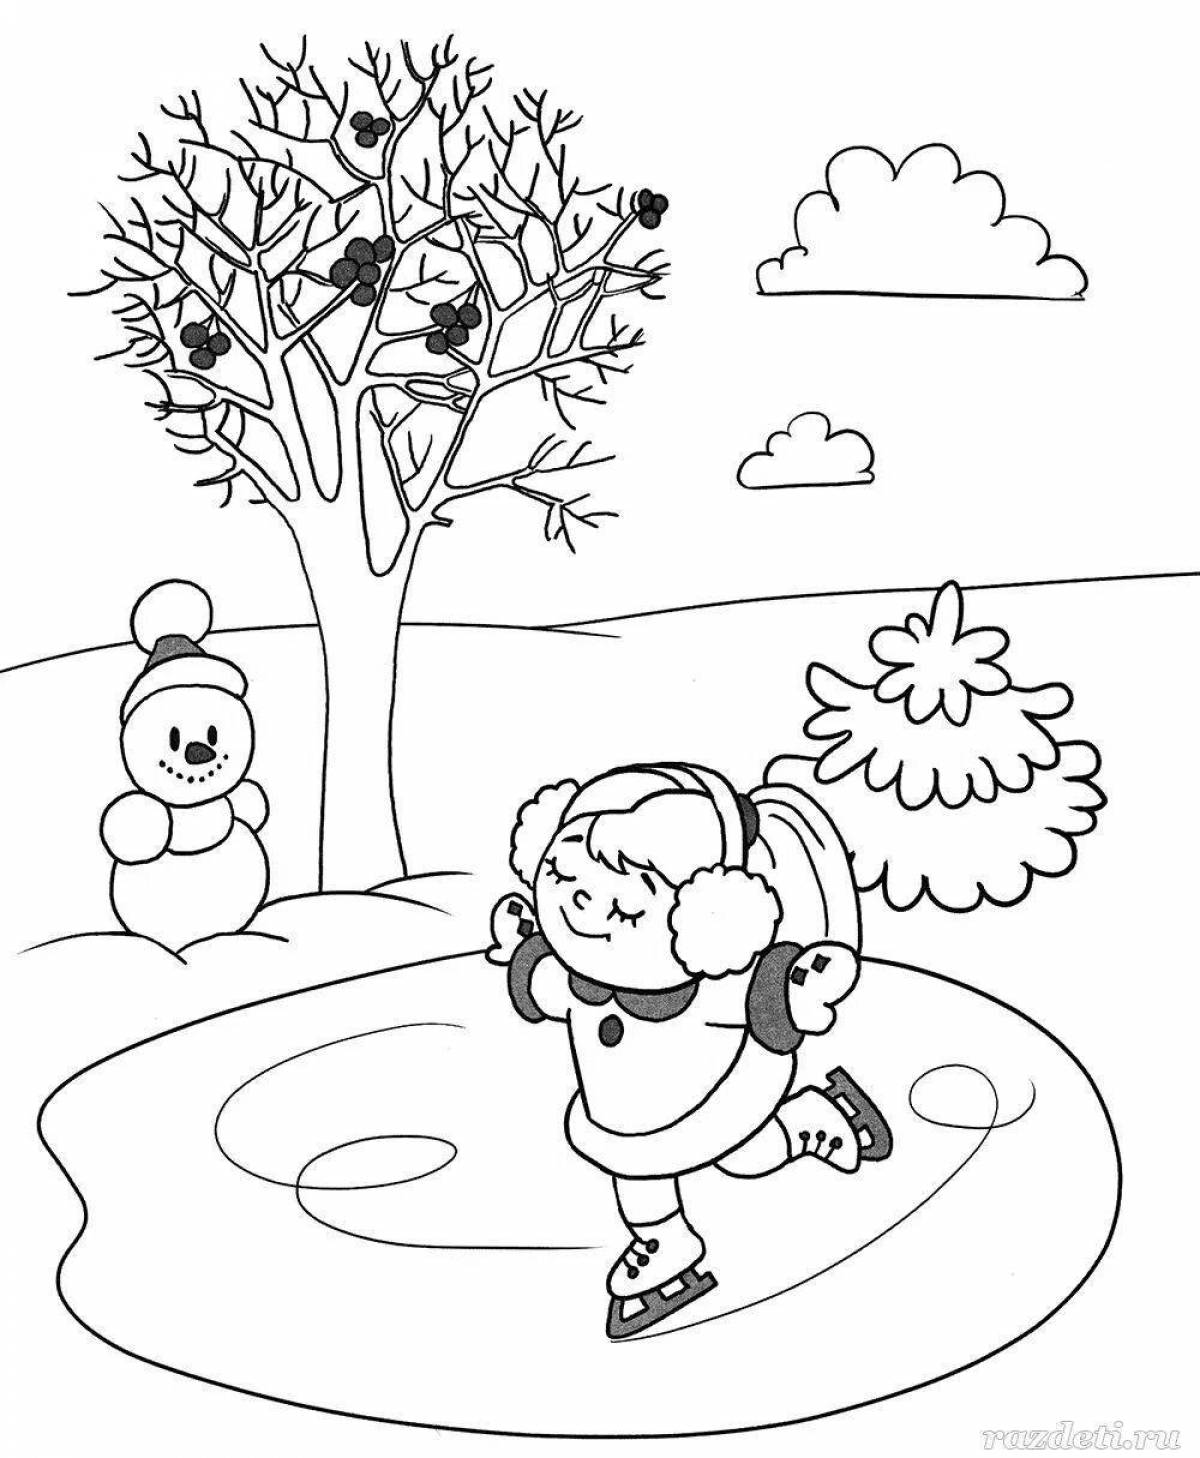 Cute winter coloring book for 6-7 year olds